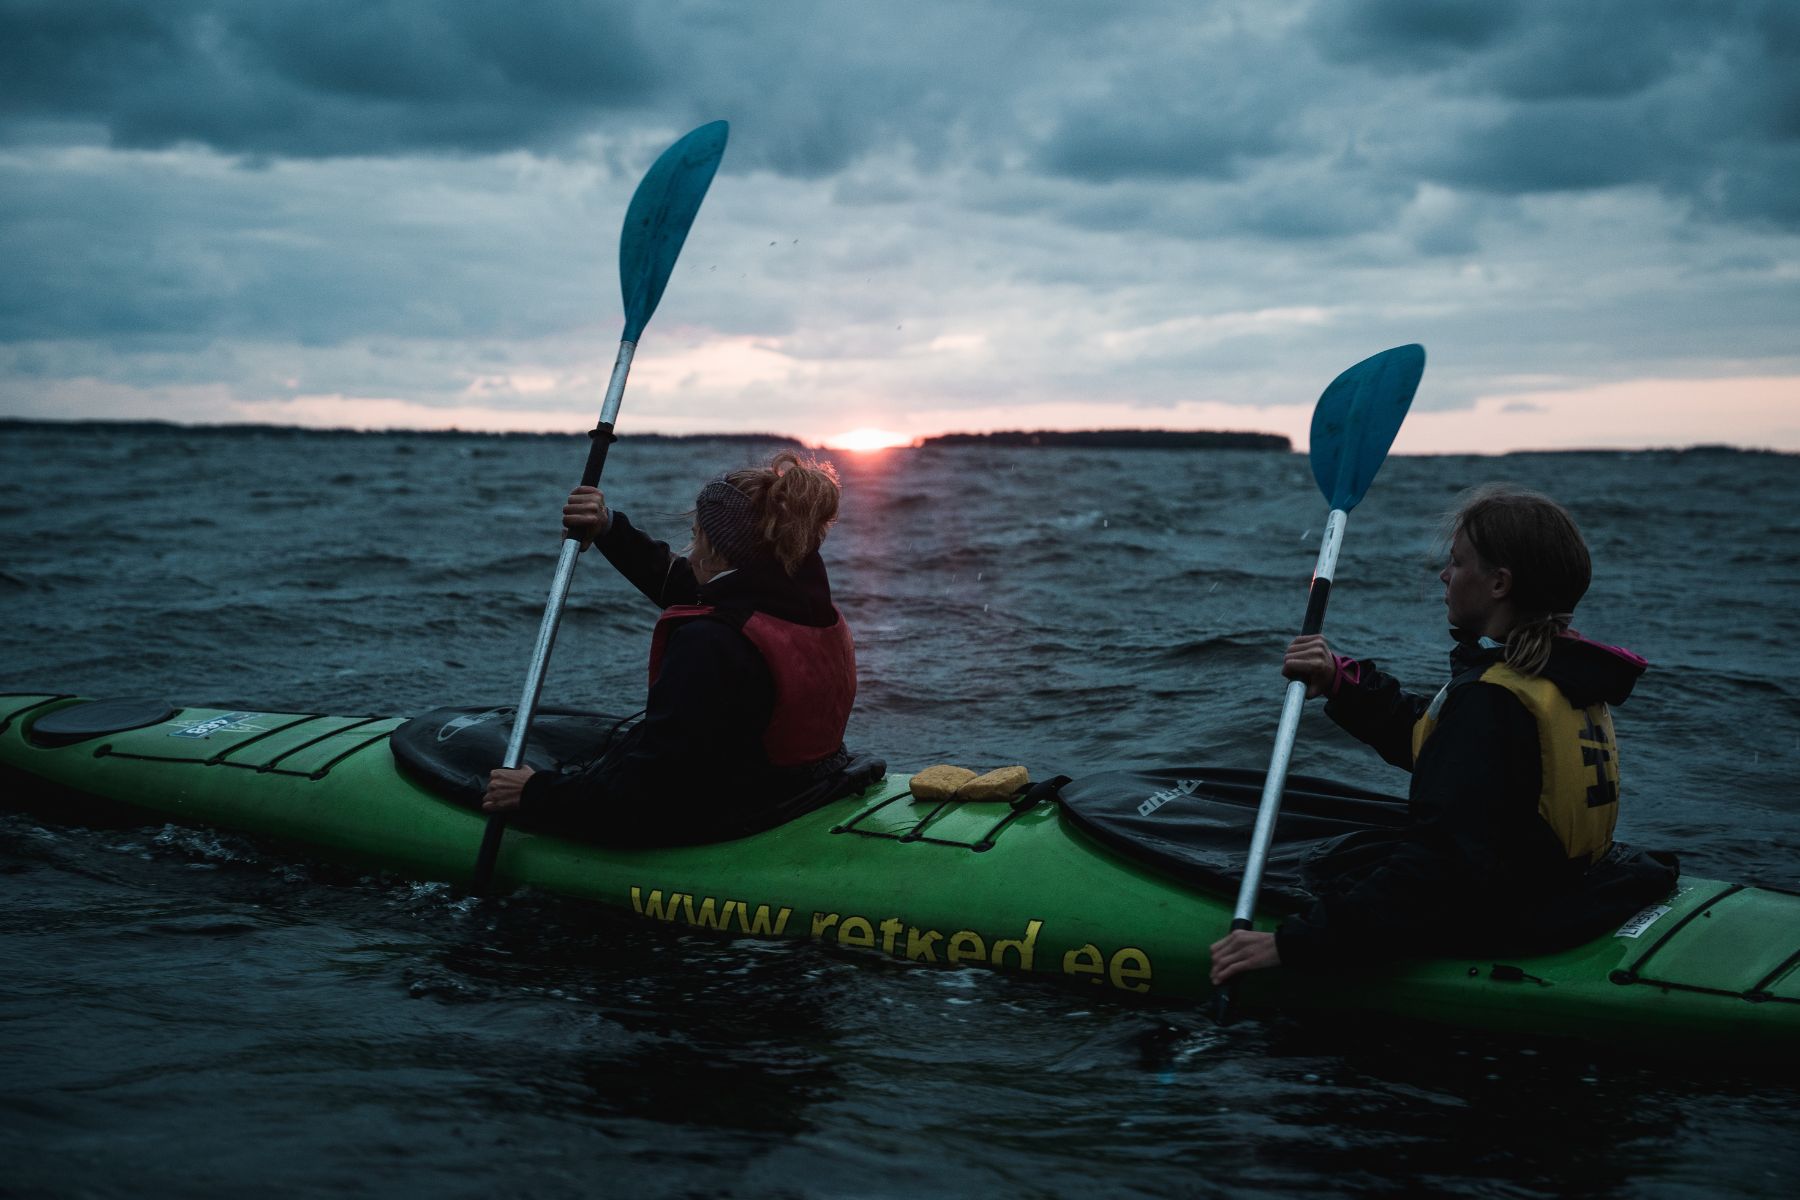 Two kayakers in the waters of Pesassaar, an island off the coast of Estonia